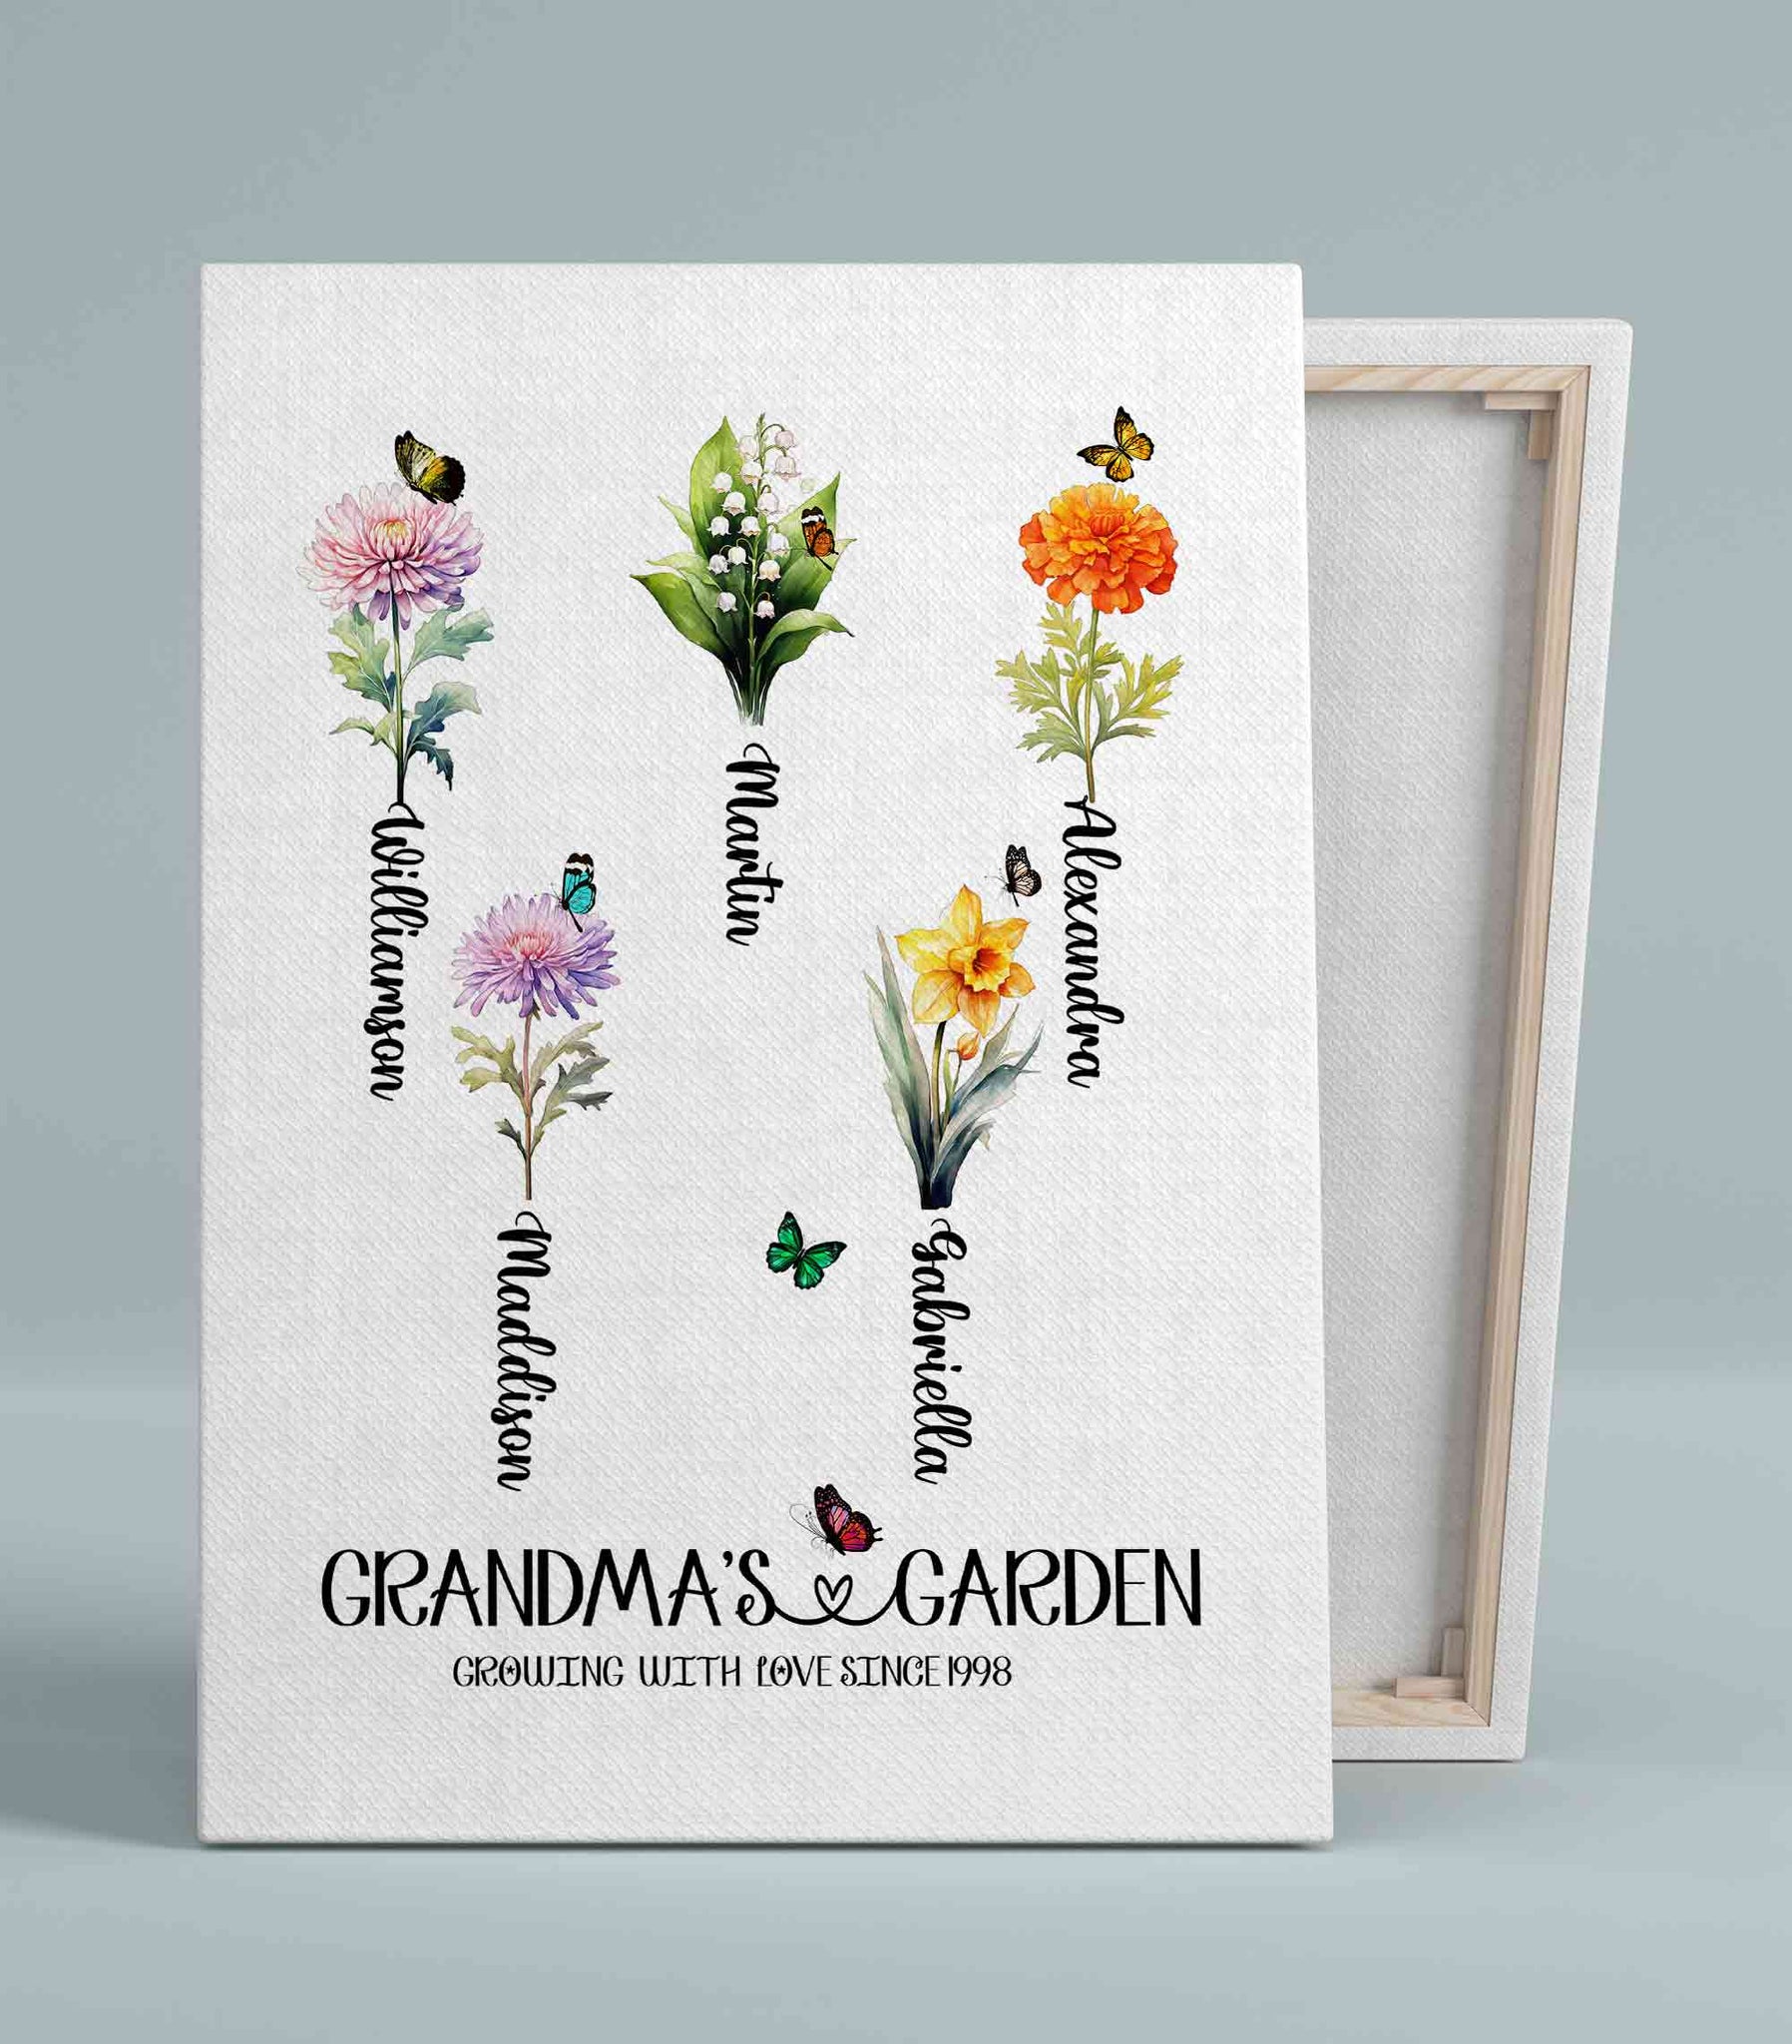 Personalized Birth Month Flower Print, Birth Month Flower Poster, Grandma's Garden Print, Birth Flower Gift, Mothers Day Gift, Family Flower Painting, Gift for Grandma